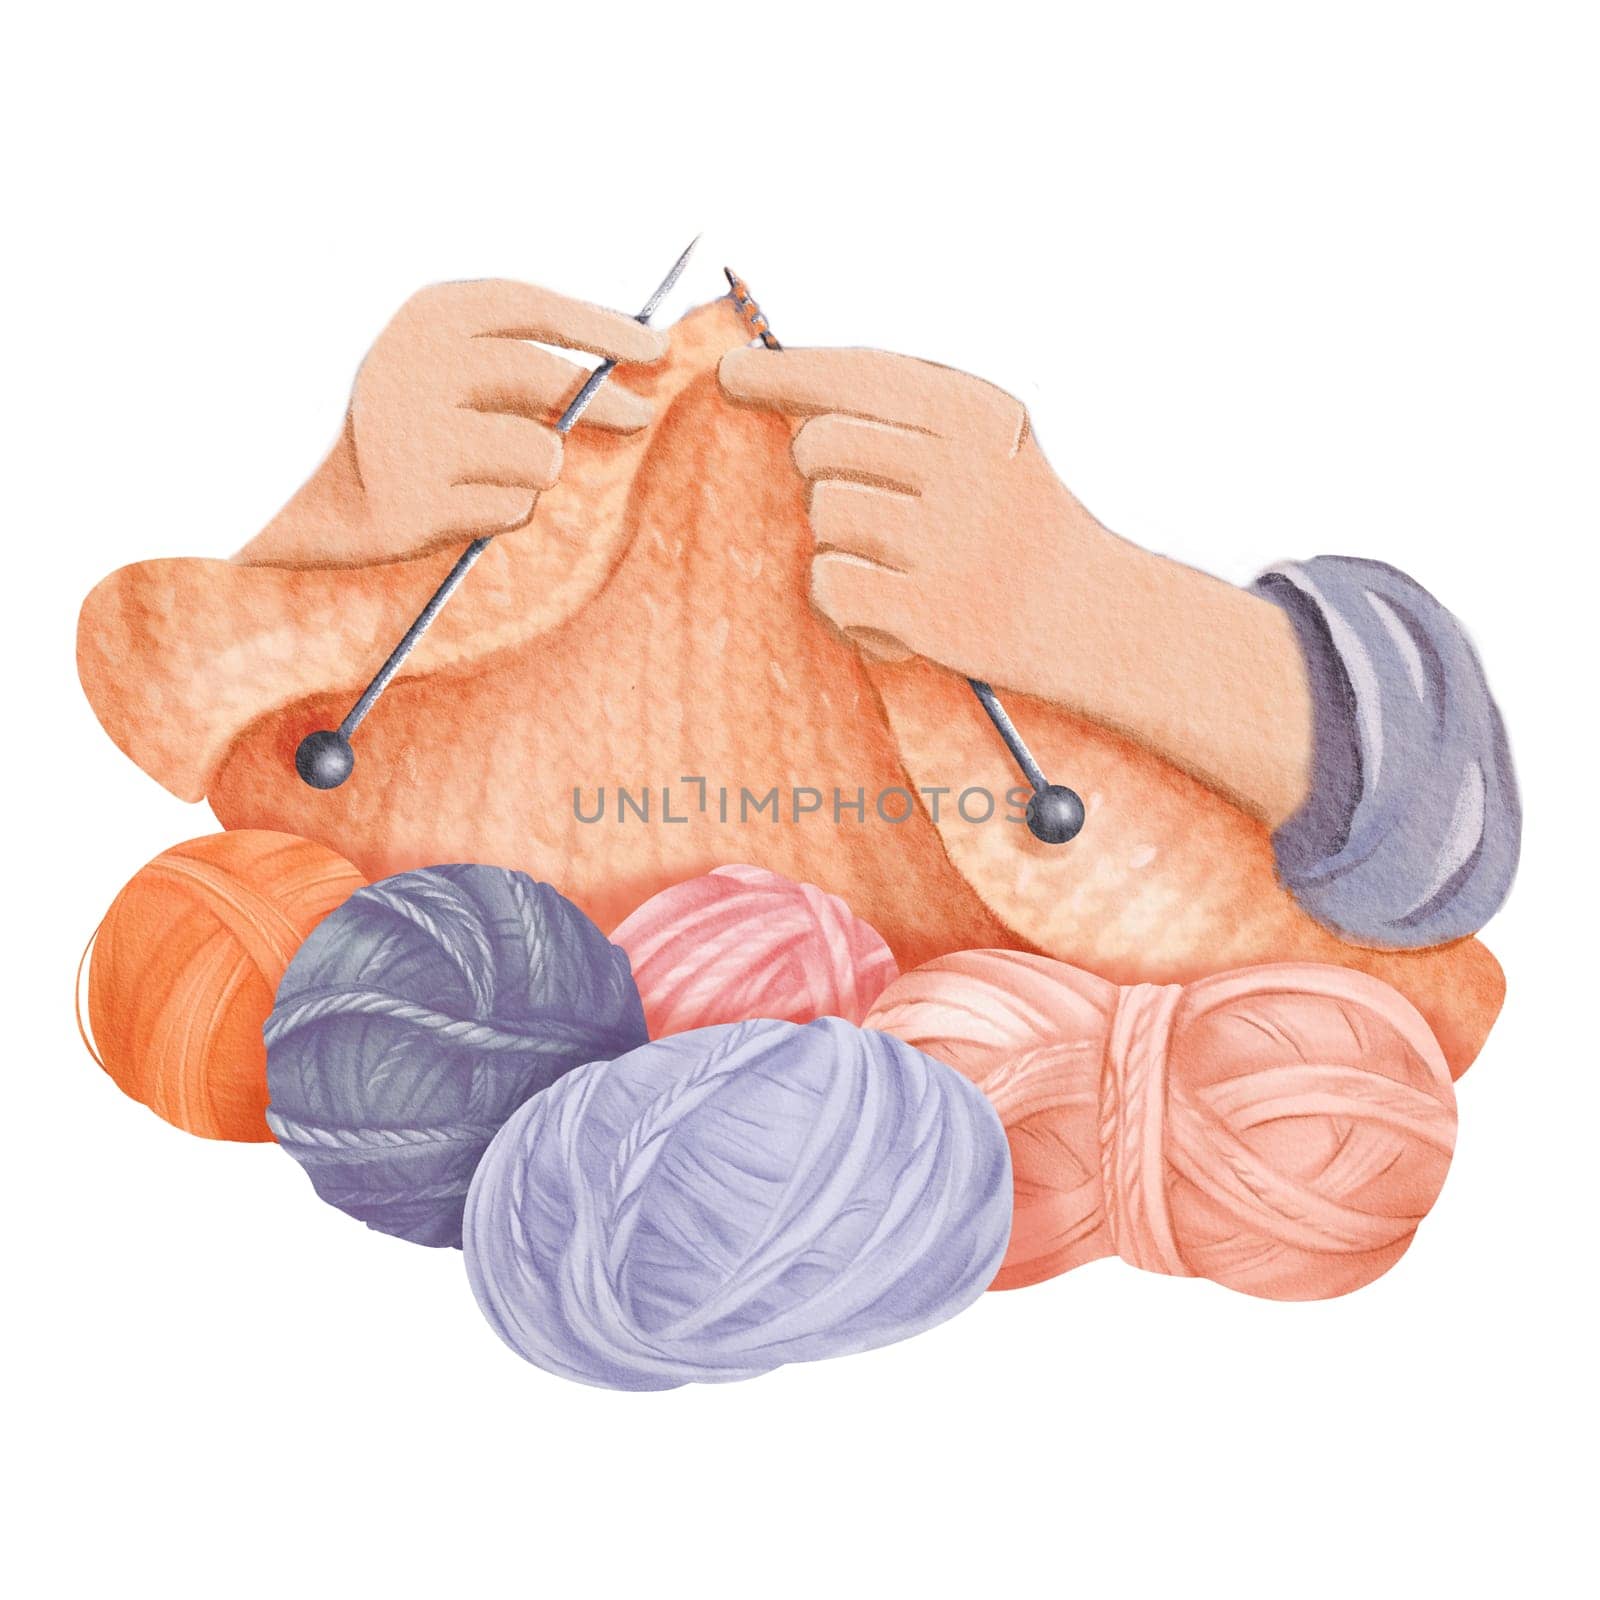 A watercolor composition of knitting, with two hands skillfully crafting fabric. colorful wool yarn balls in various warm hues, for crafting blogs, knitting tutorials cozy home decor prints by Art_Mari_Ka